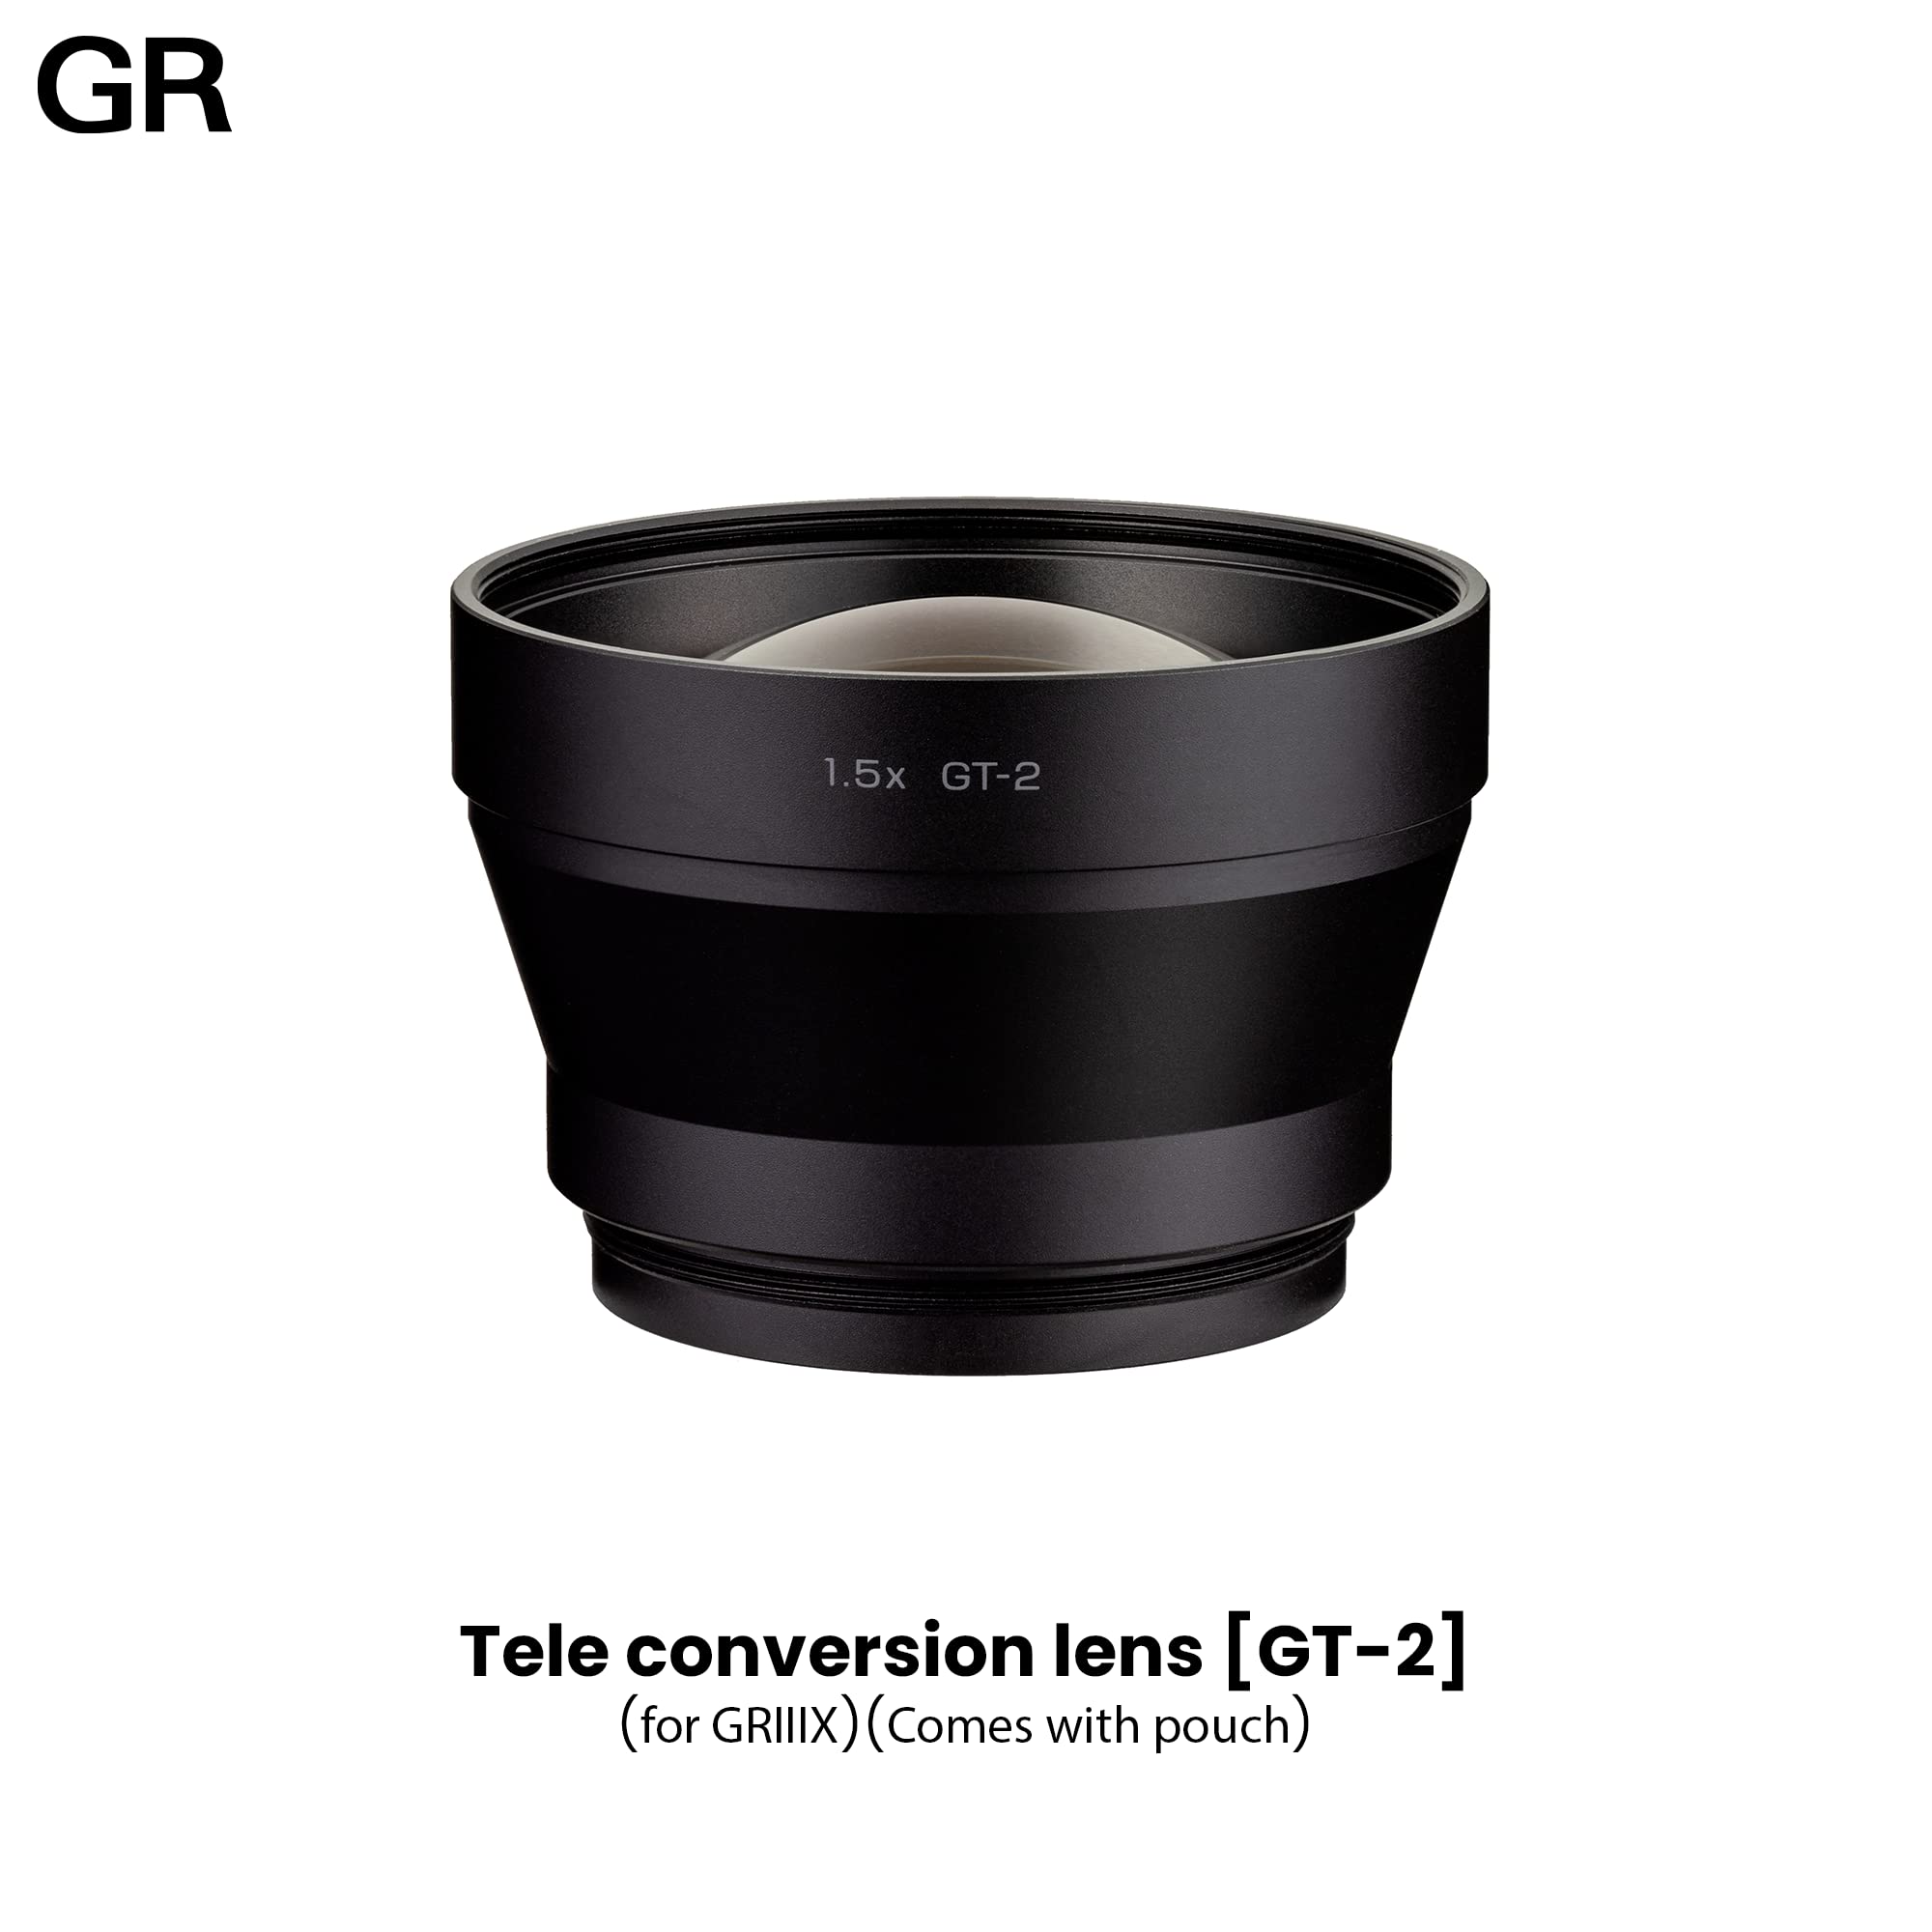 Ricoh Teleconversion Lens GT-2 [Compatible with RICOH GR IIIx] [1.5X teleconversion Lens] [Achieves Focal Length Equivalent to 75mm When cropping 50mm] [Used with Lens Adapter GA-2 (Sold Separately)]